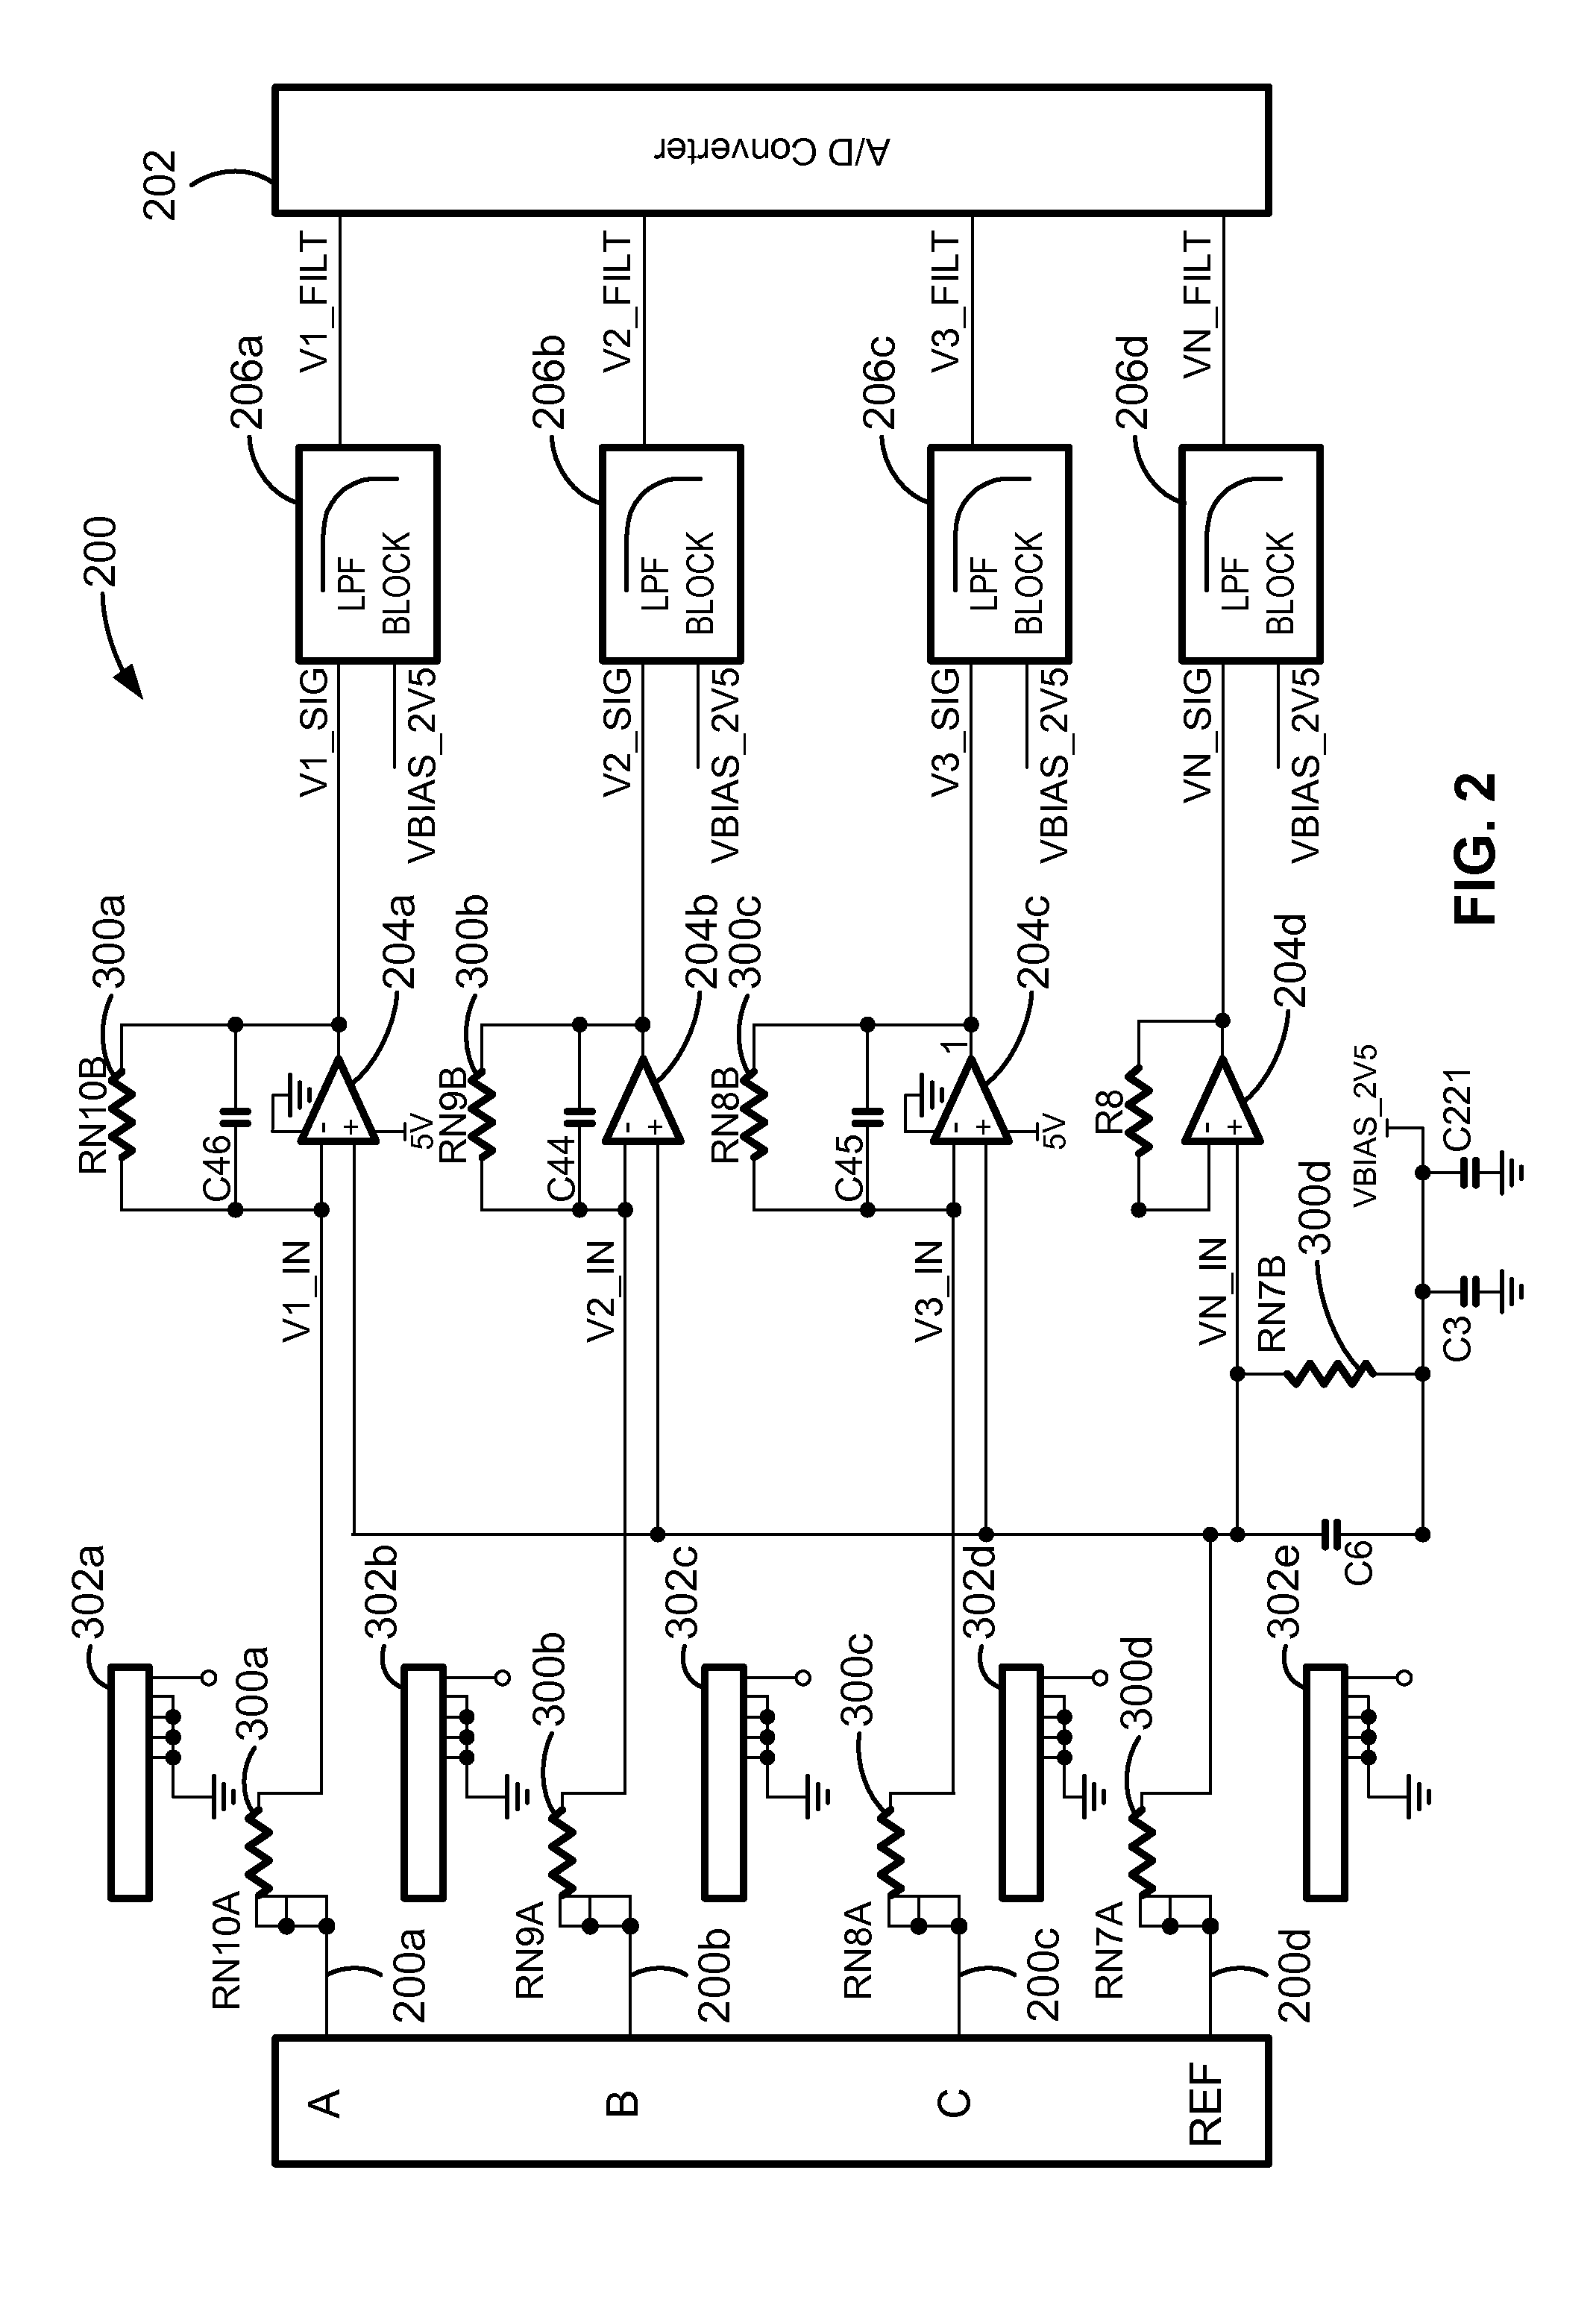 Resistor shield to minimize crosstalk and power supply interference